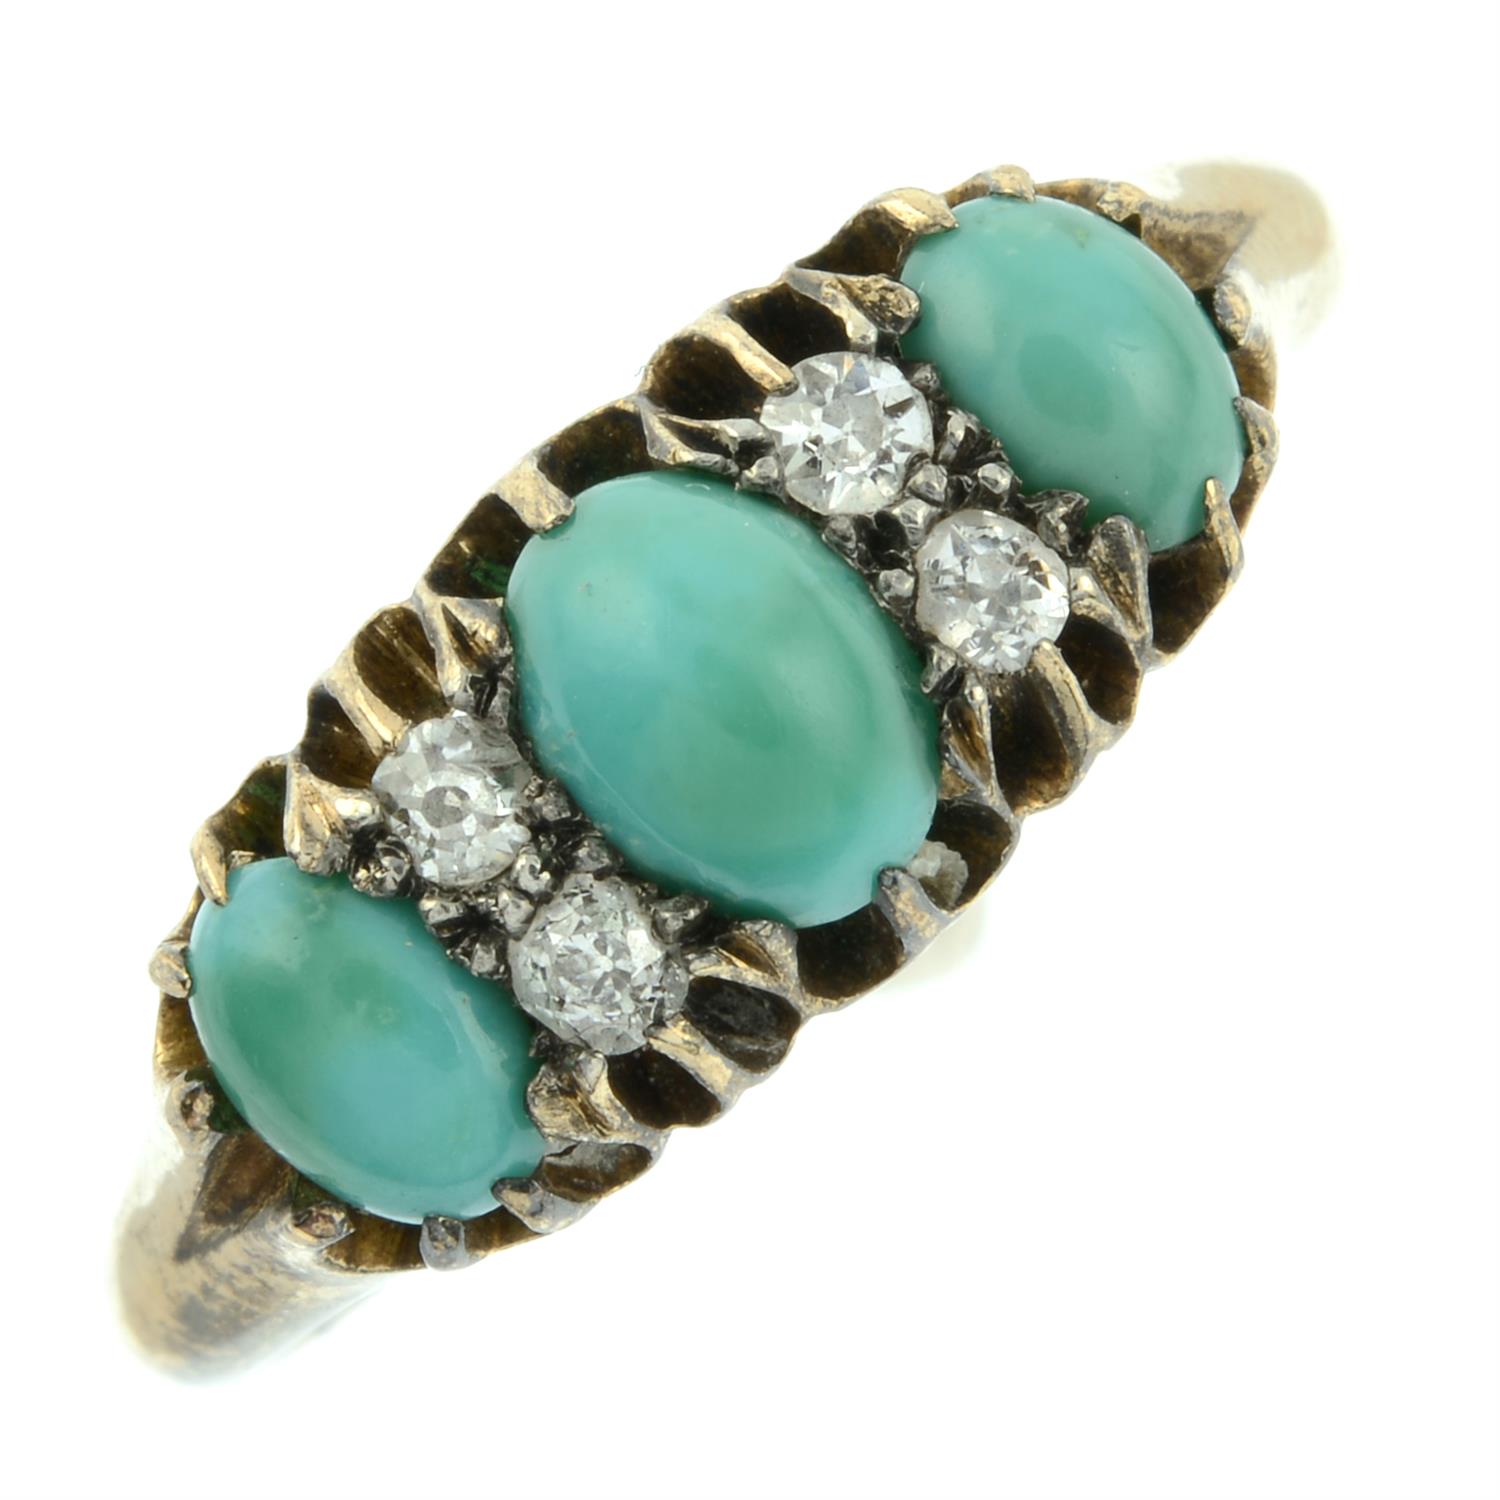 An early 20th century 18ct gold graduated turquoise three-stone ring, with old-cut diamond spacers. - Image 2 of 5